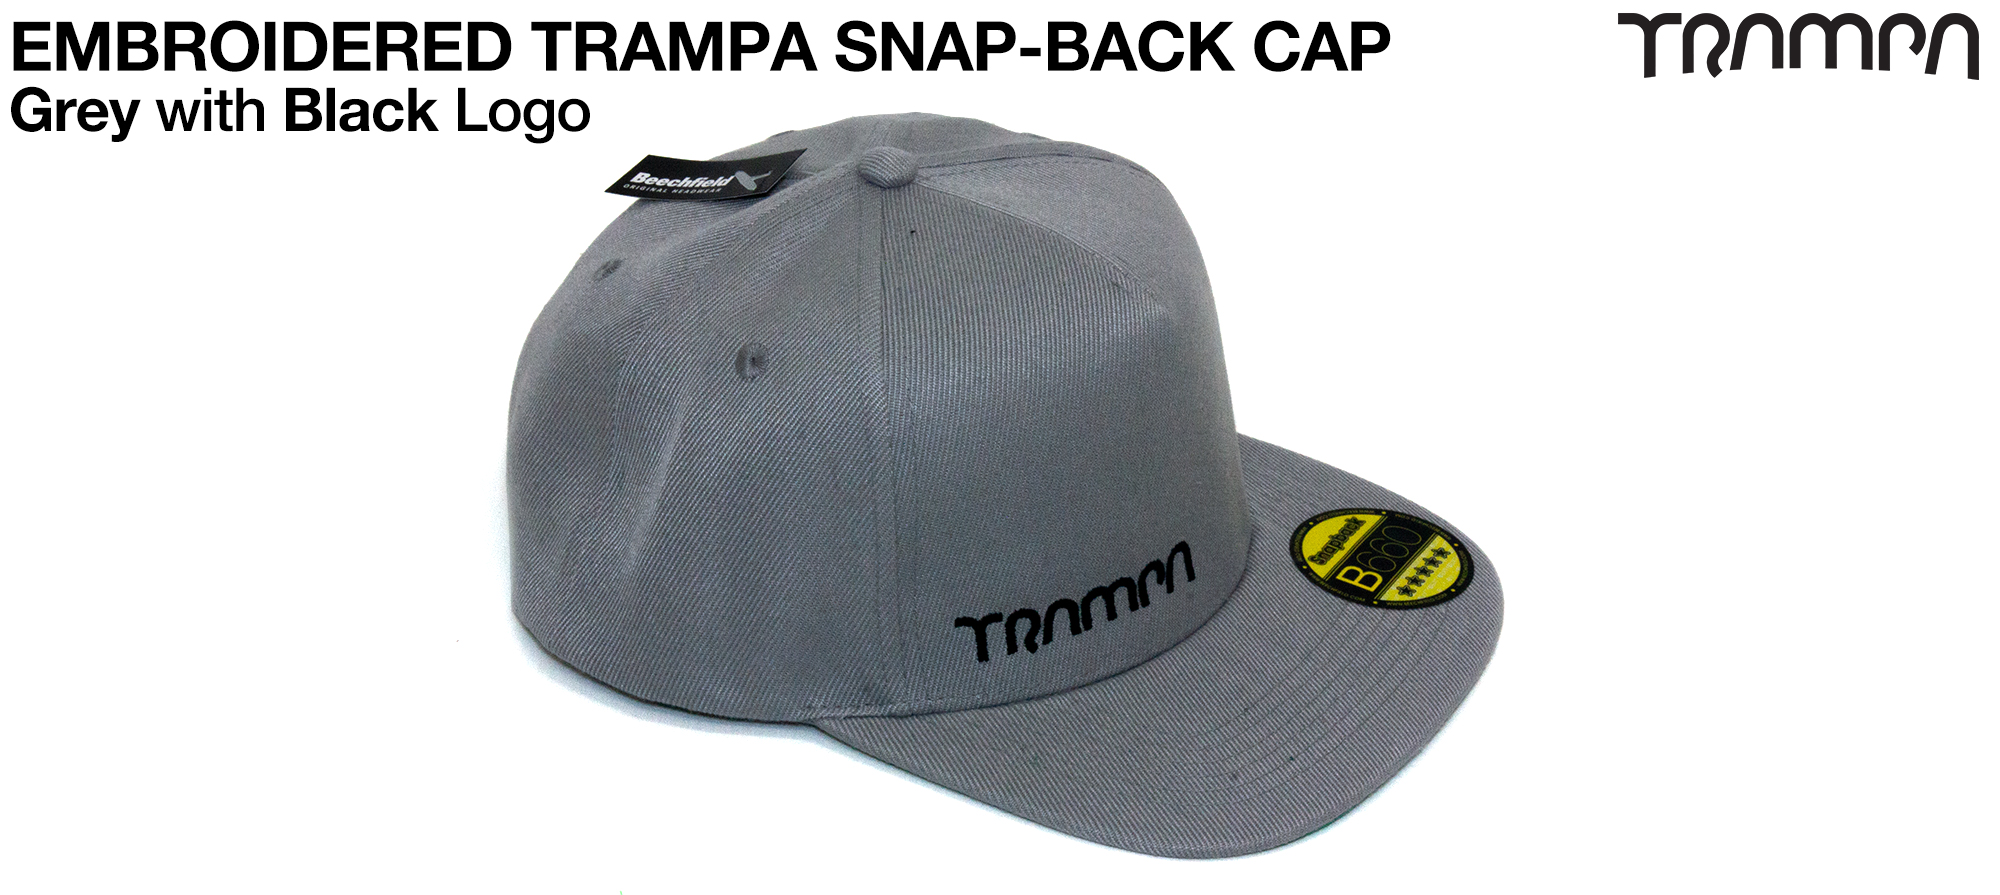 GREY SNAPBACK Cap with BLACK logo embroidered 